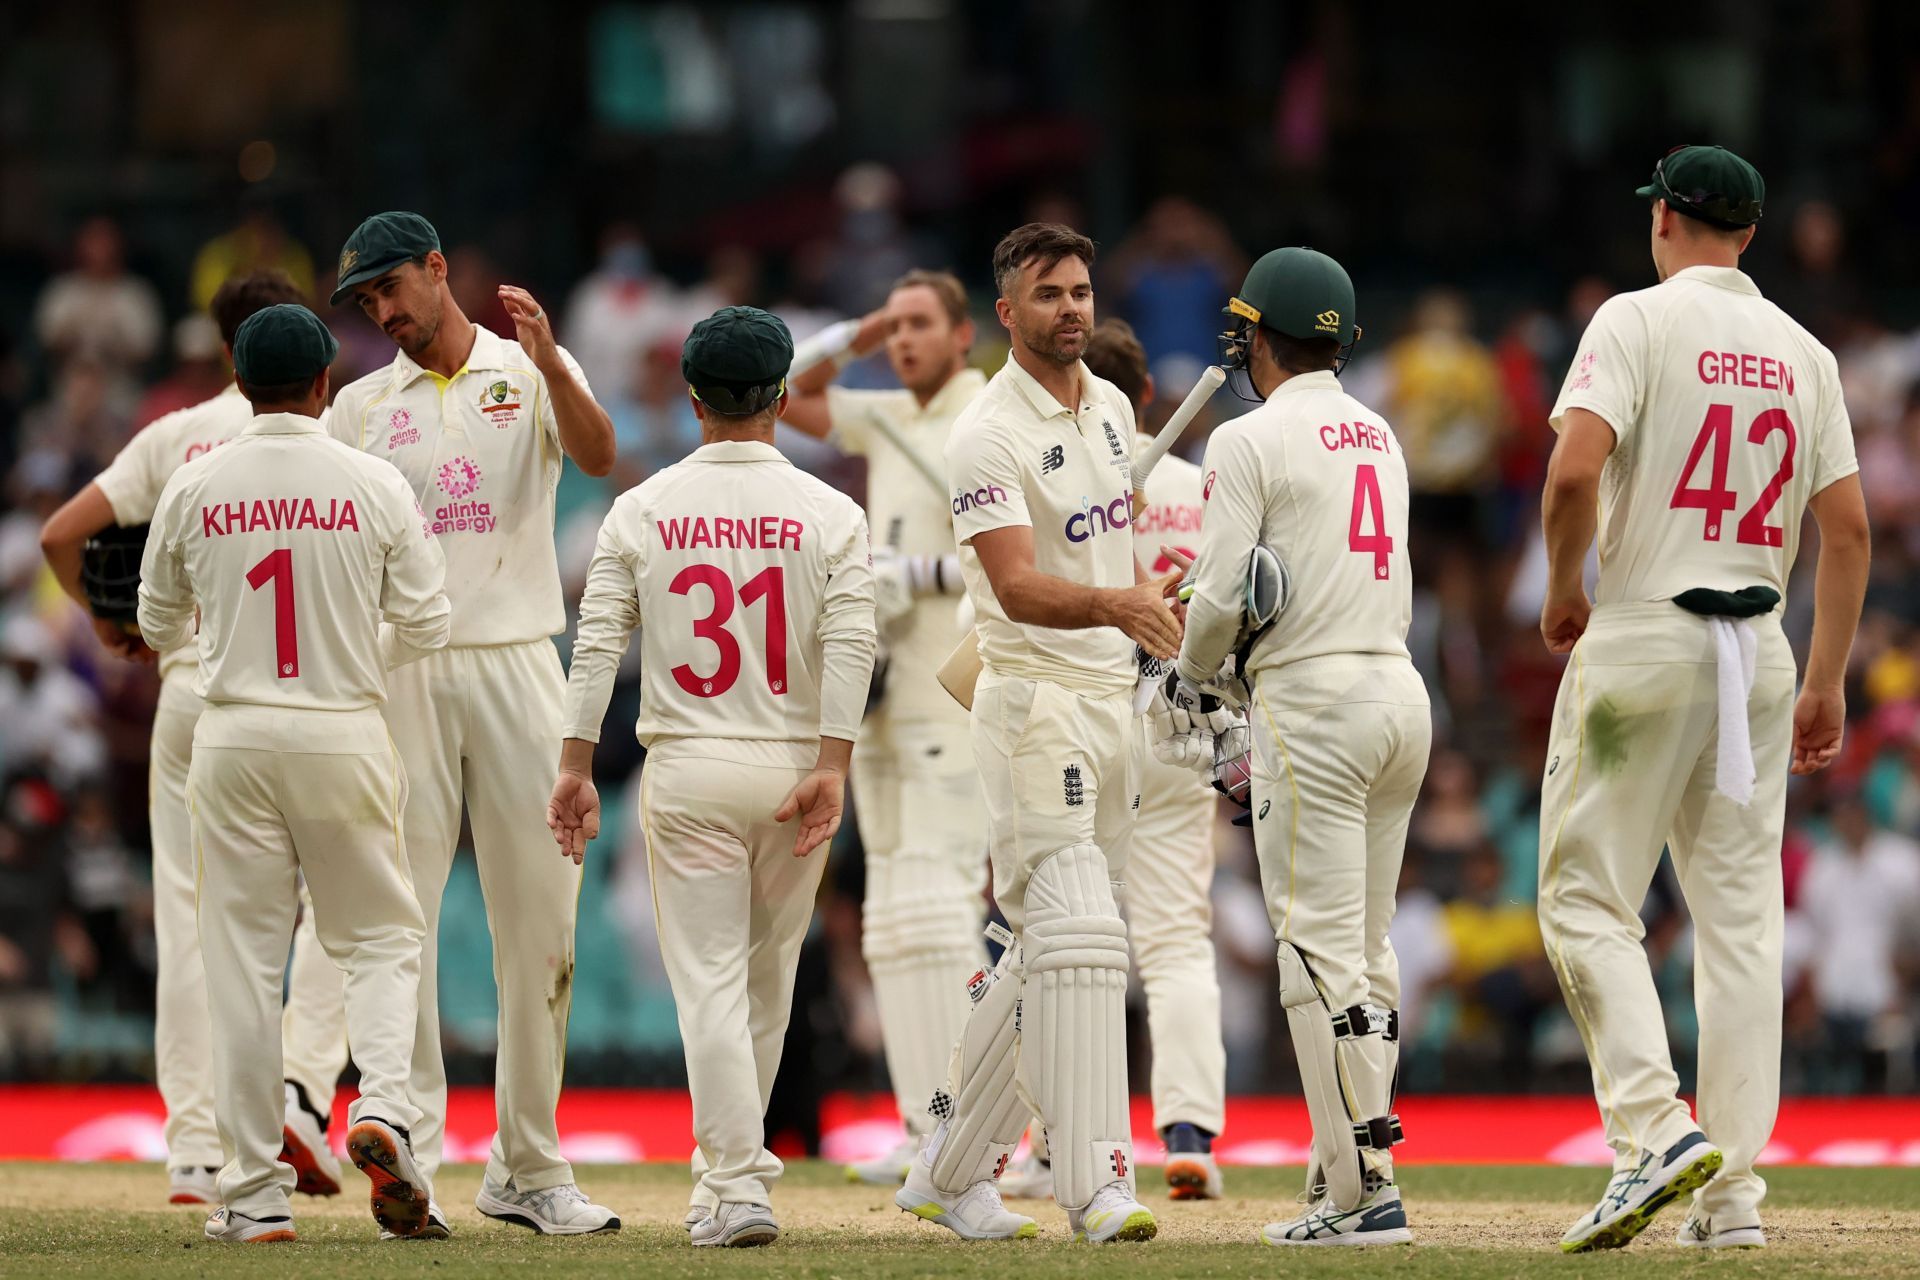 England managed to escape with a thrilling draw in the fourth Ashes Test